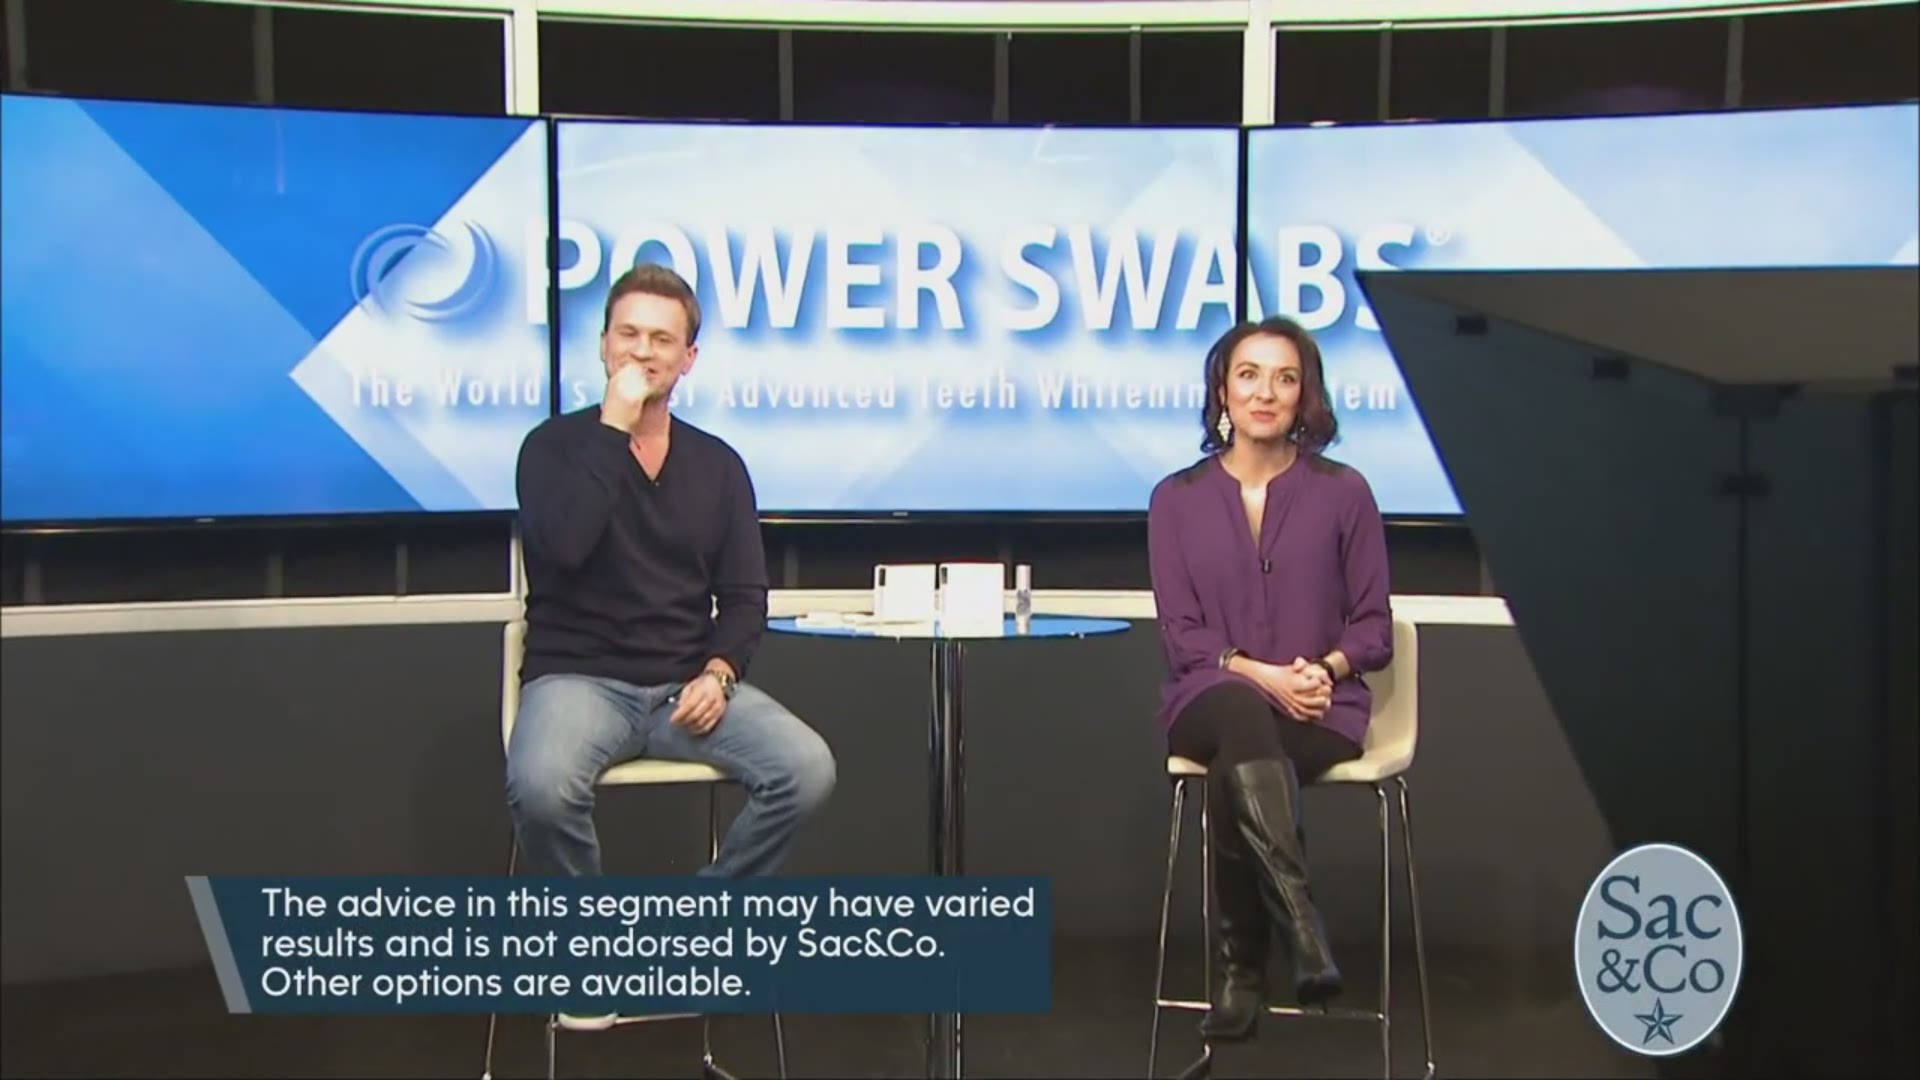 Find out the secret to a visibly whiter smile without sensitivity or discomfort with Power Swabs! The following is a paid segment sponsored by True Earth Health Solutions.